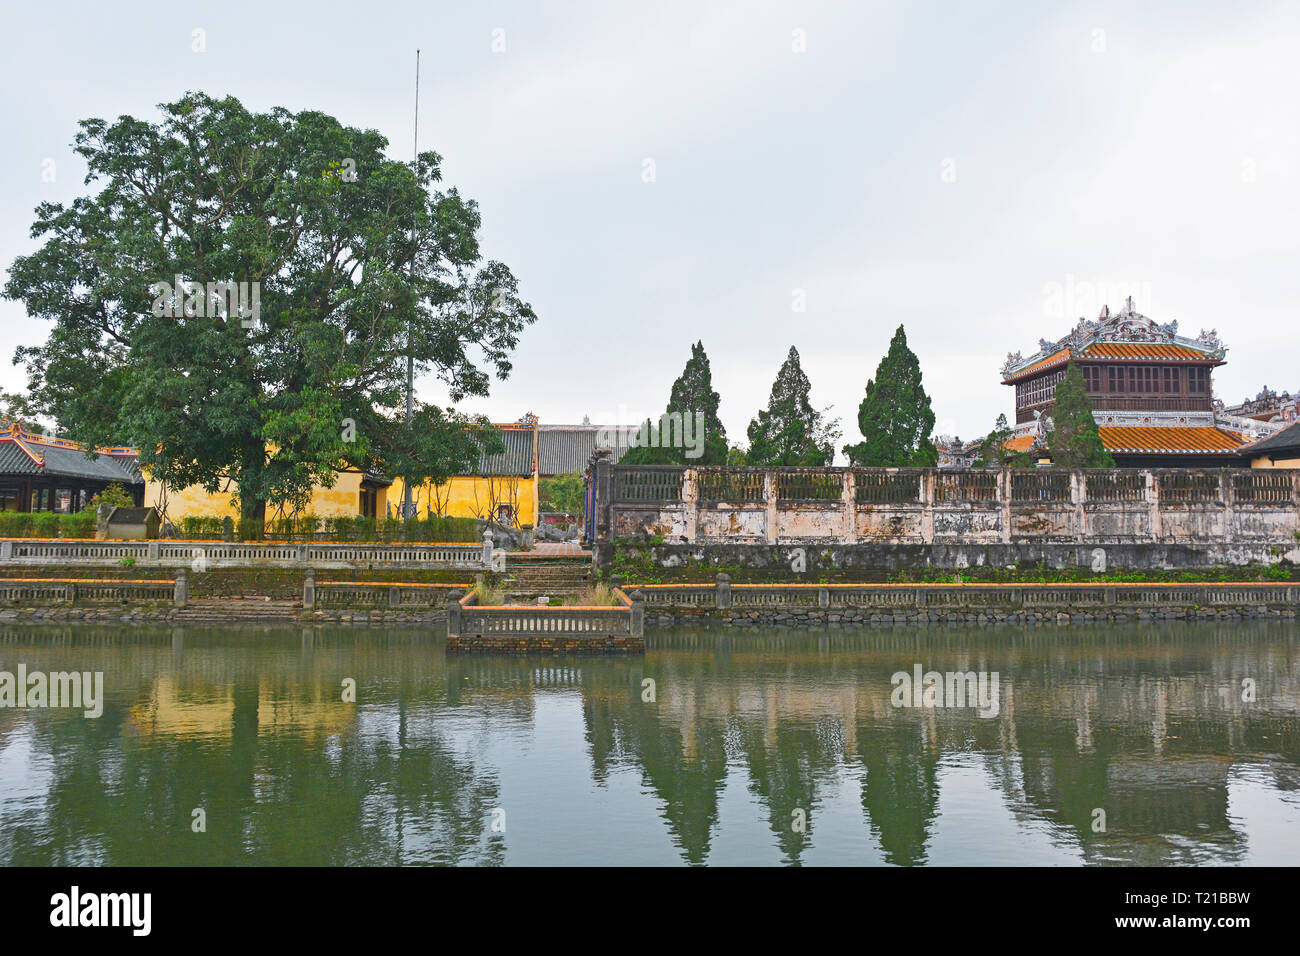 Ngoc Dich Lake within the grounds of the Imperial City, Hue, Vietnam Stock Photo